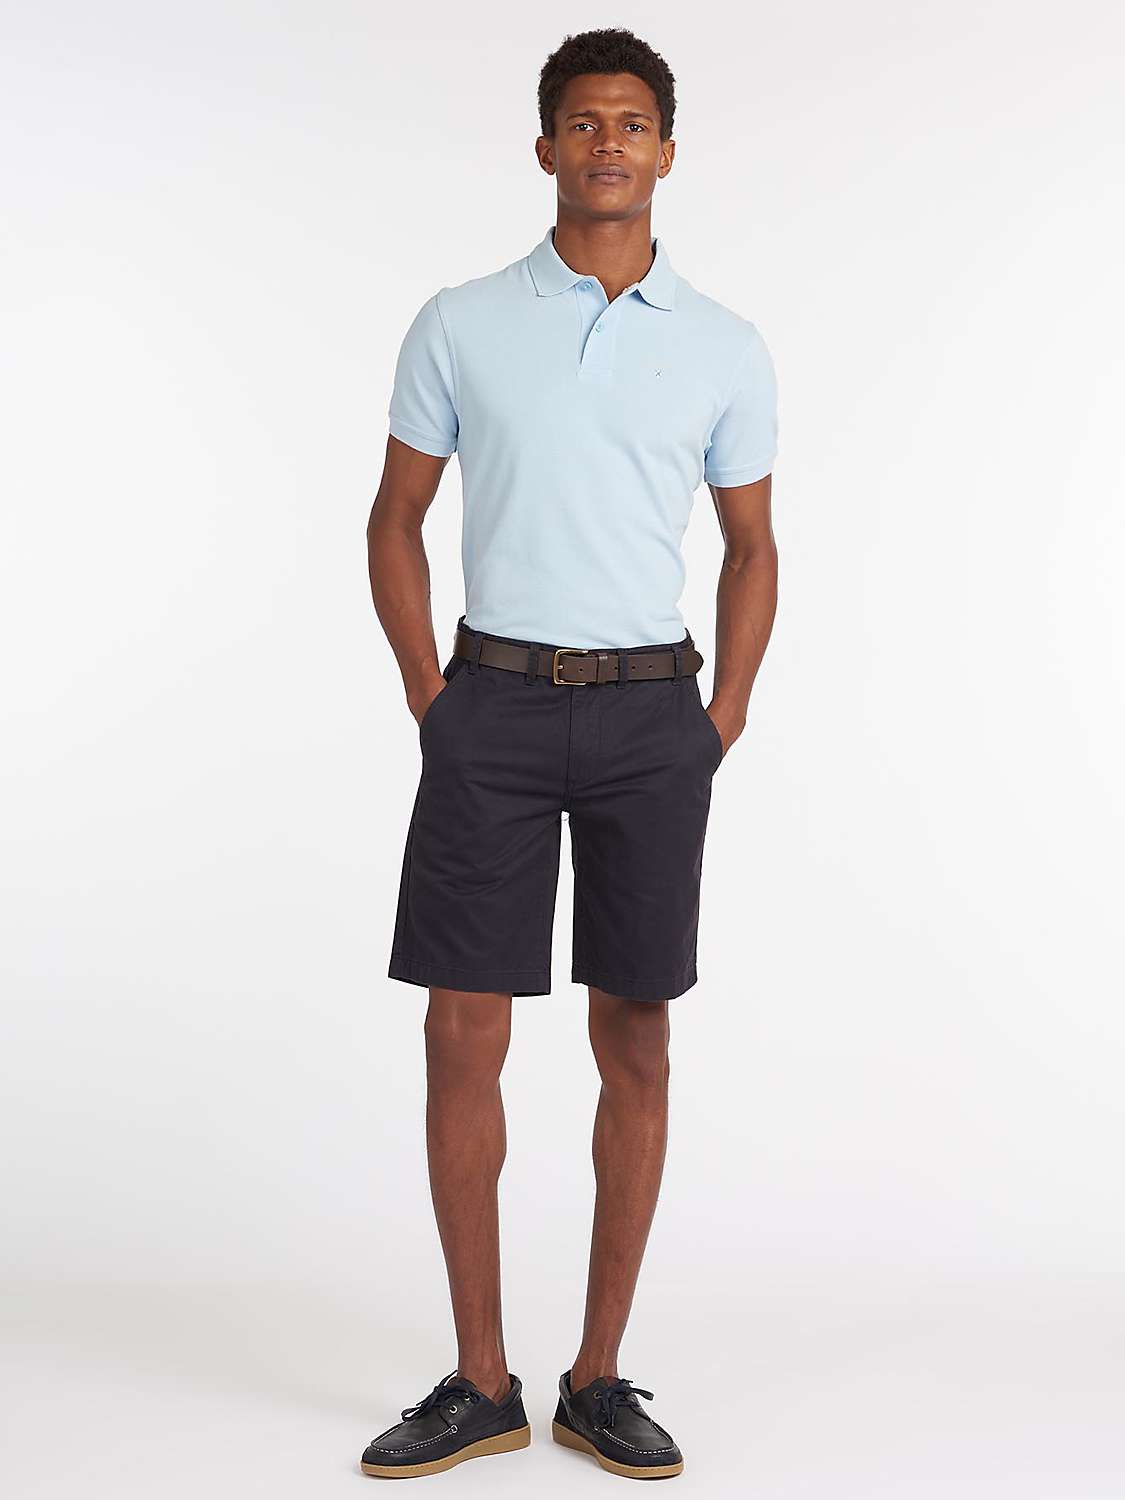 Buy Barbour Short Sleeve Sports Polo Shirt, Sky Online at johnlewis.com